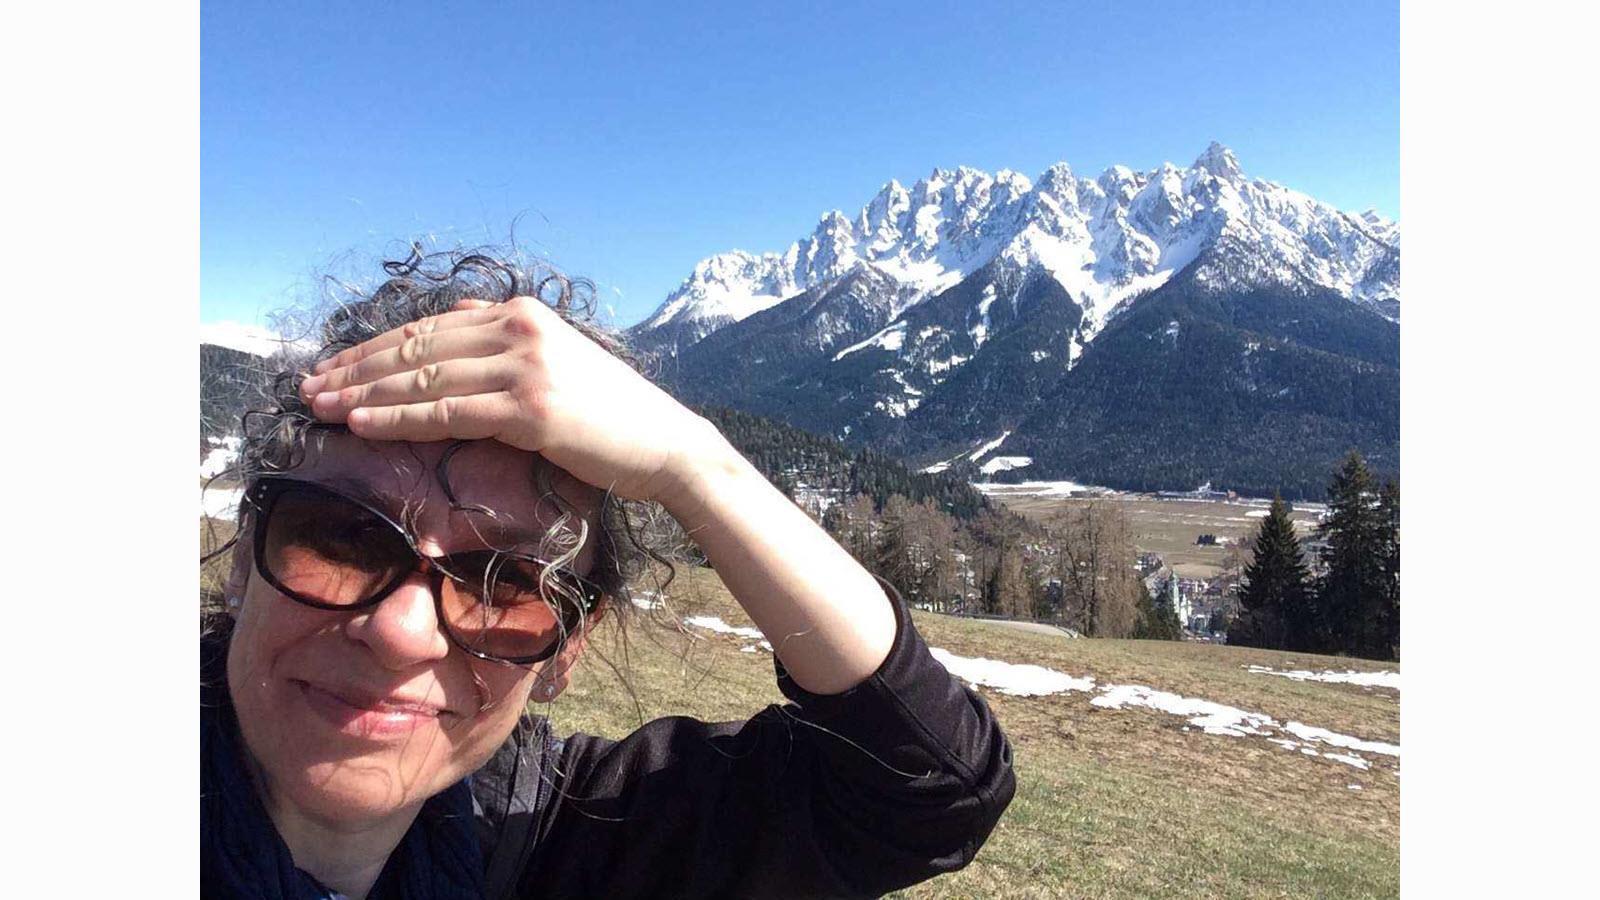 Monica Tavanti, a CSL human factors researcher, with the Swiss Alps in the background